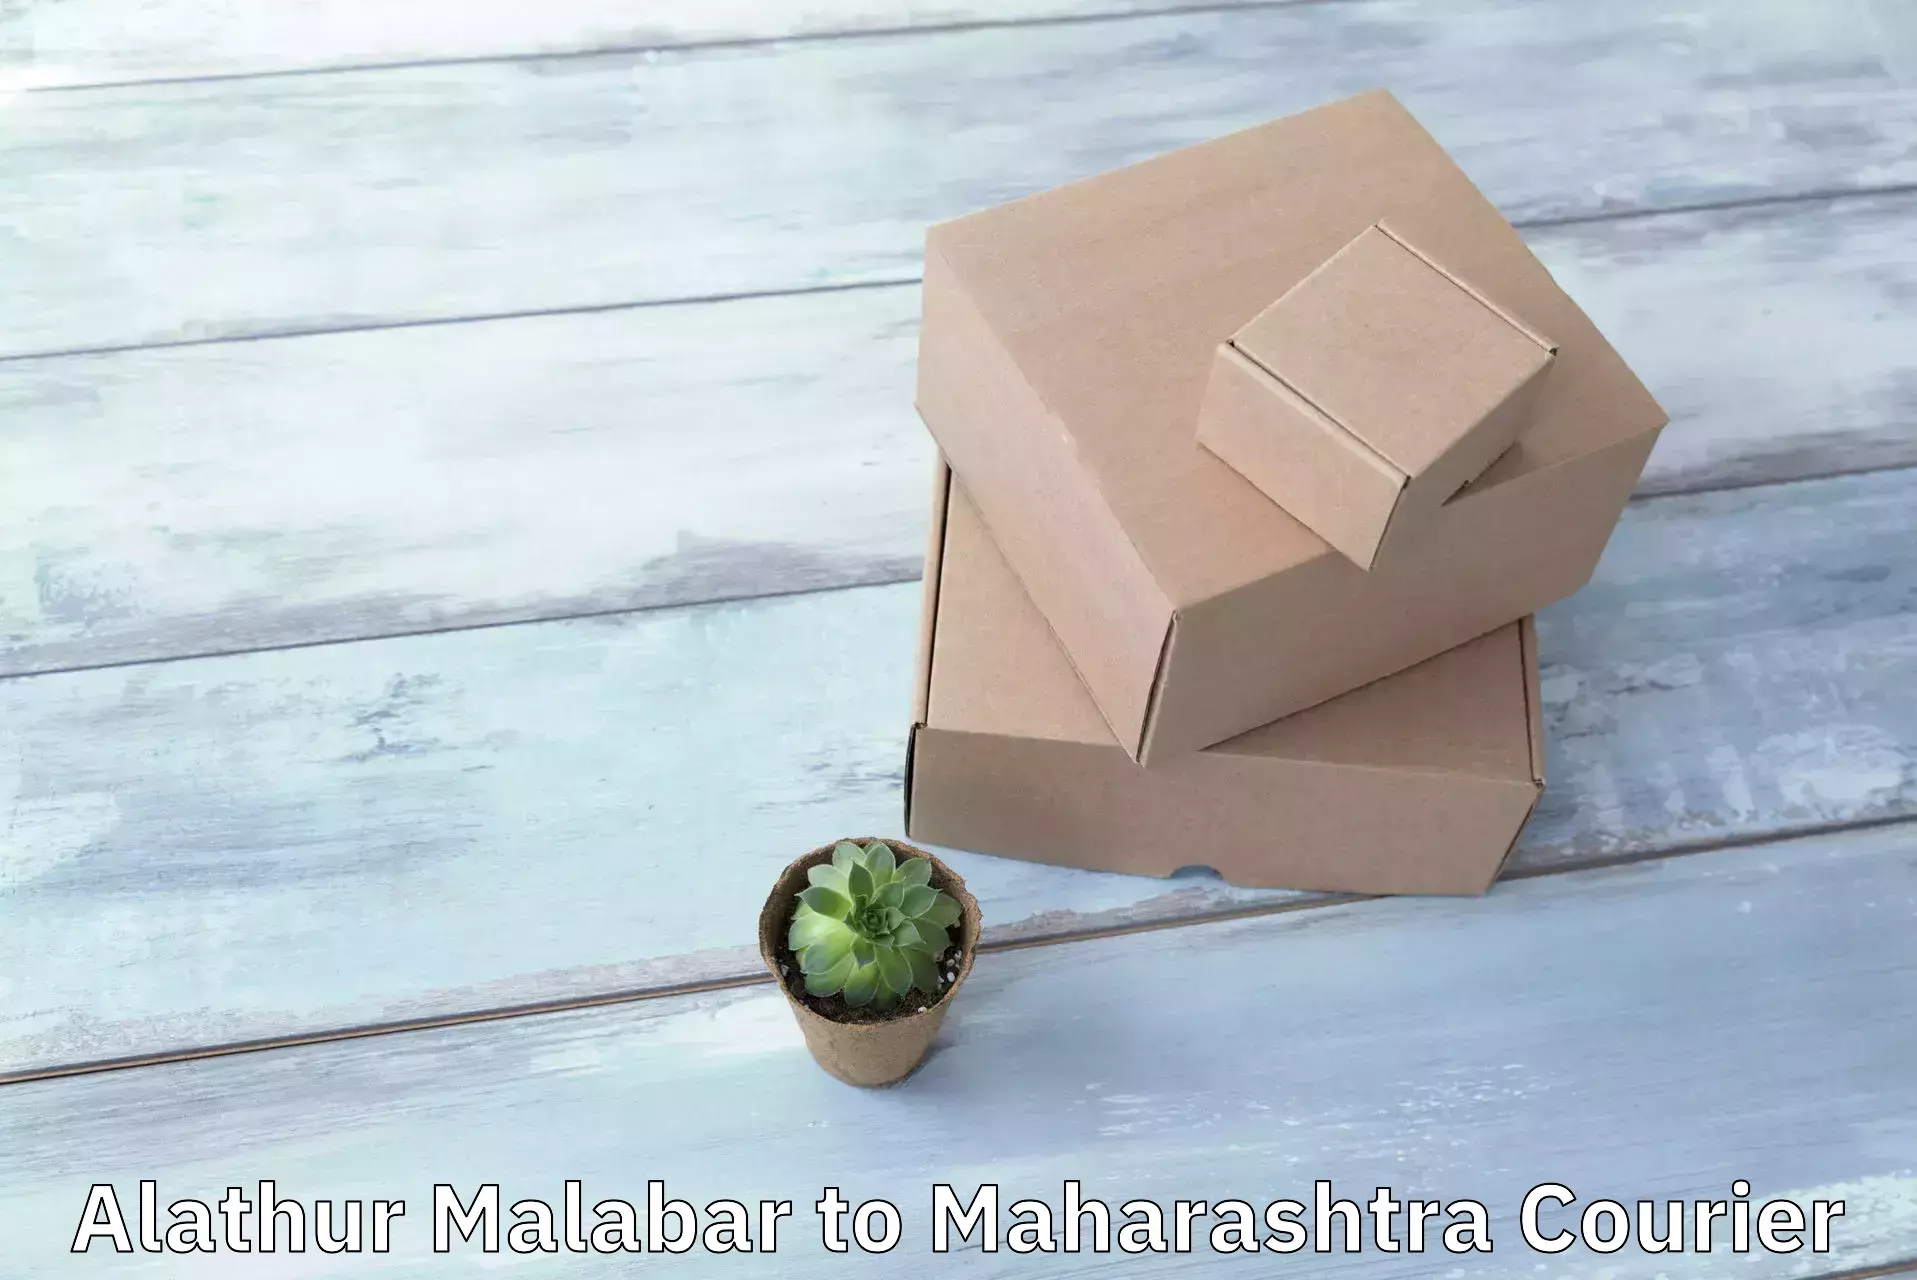 Efficient parcel delivery Alathur Malabar to Talegaon Dabhade